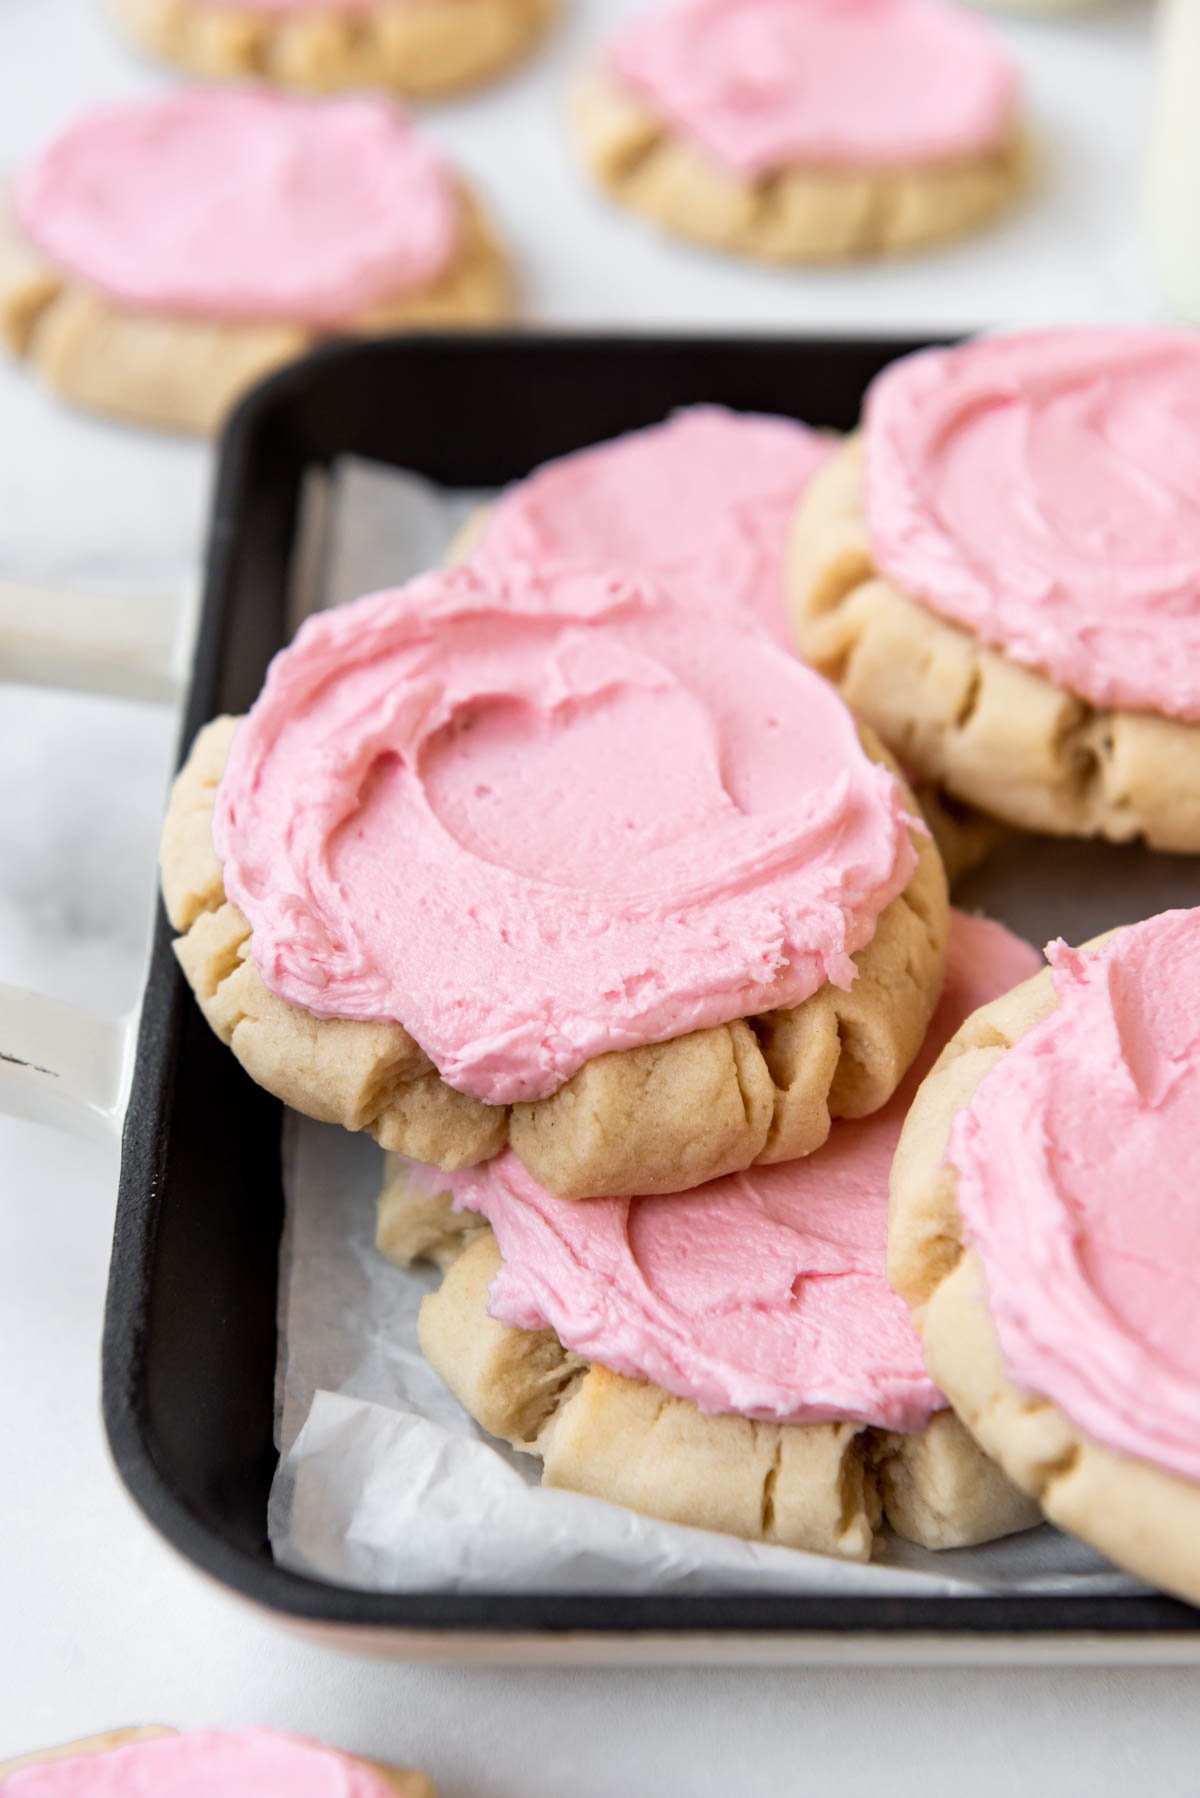 A black platter with copycat Swig sugar cookies with pink frosting arranged on it.